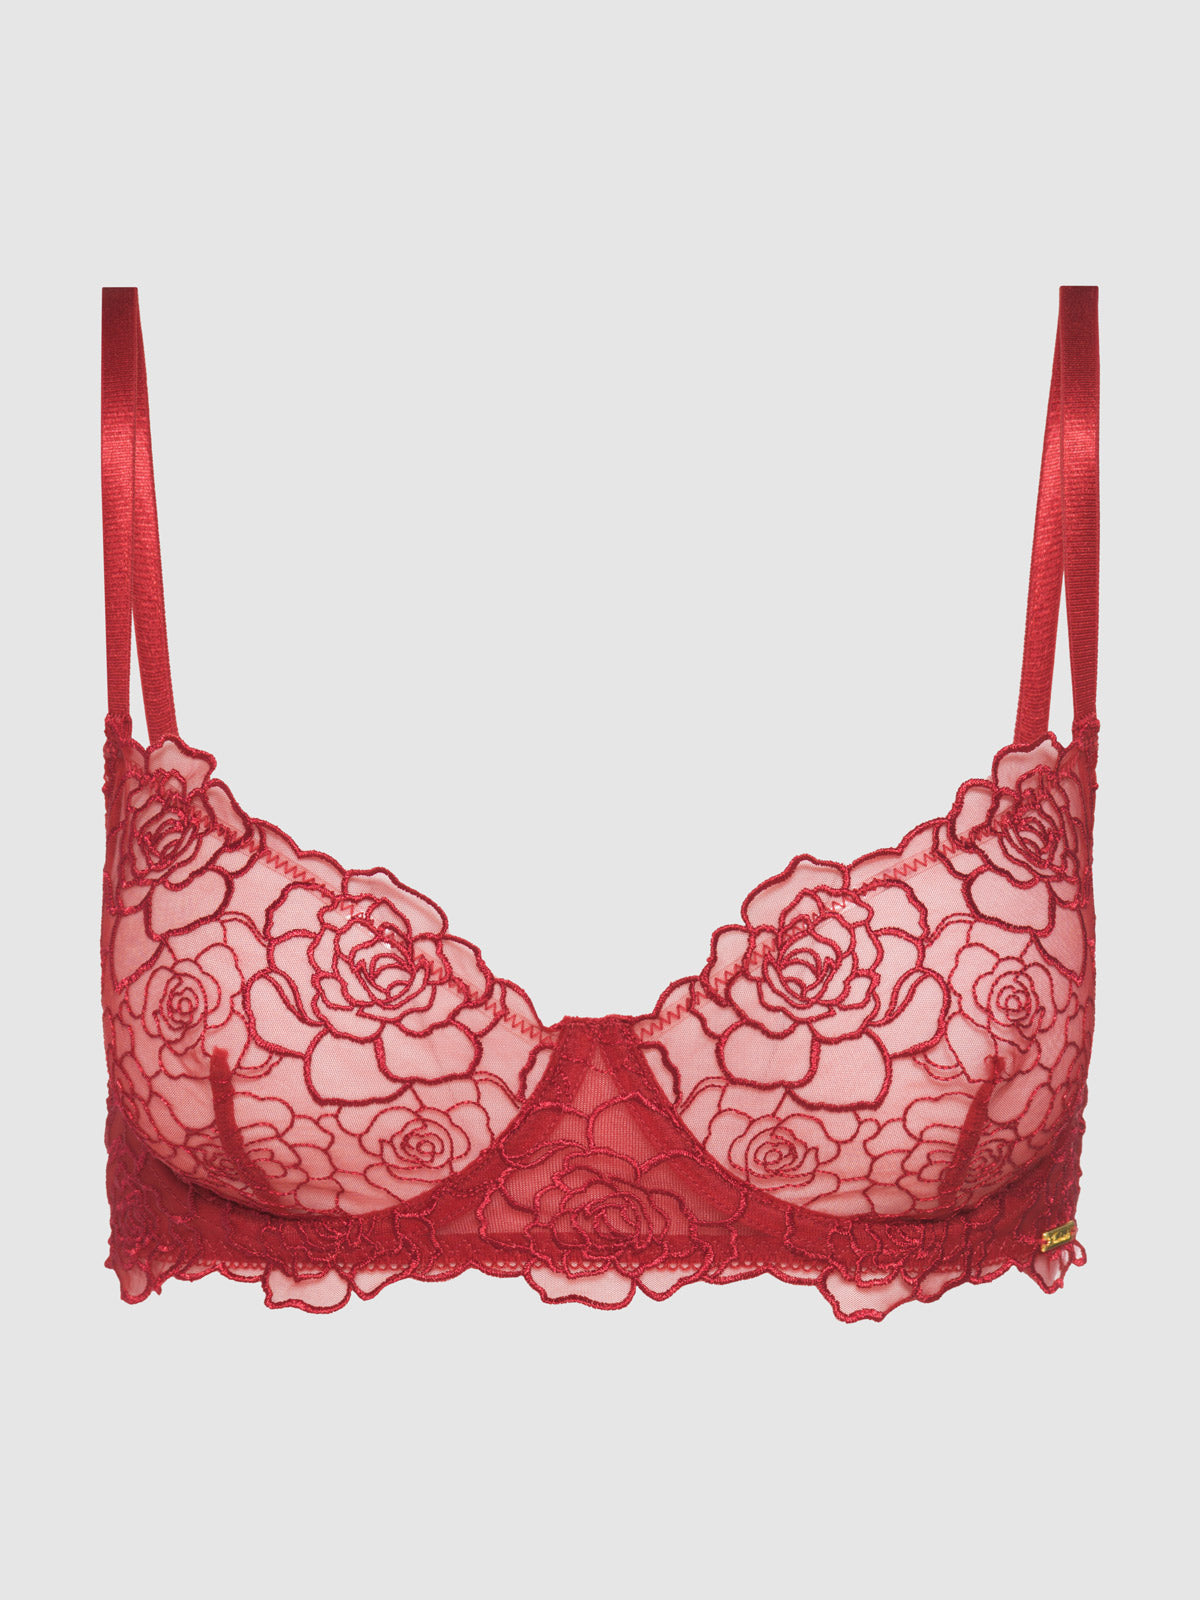 FREDERICKS OF HOLLYWOOD 6080 Velvet Bra Padded Underwire Womens 42DD Red  New Nwt $27.26 - PicClick